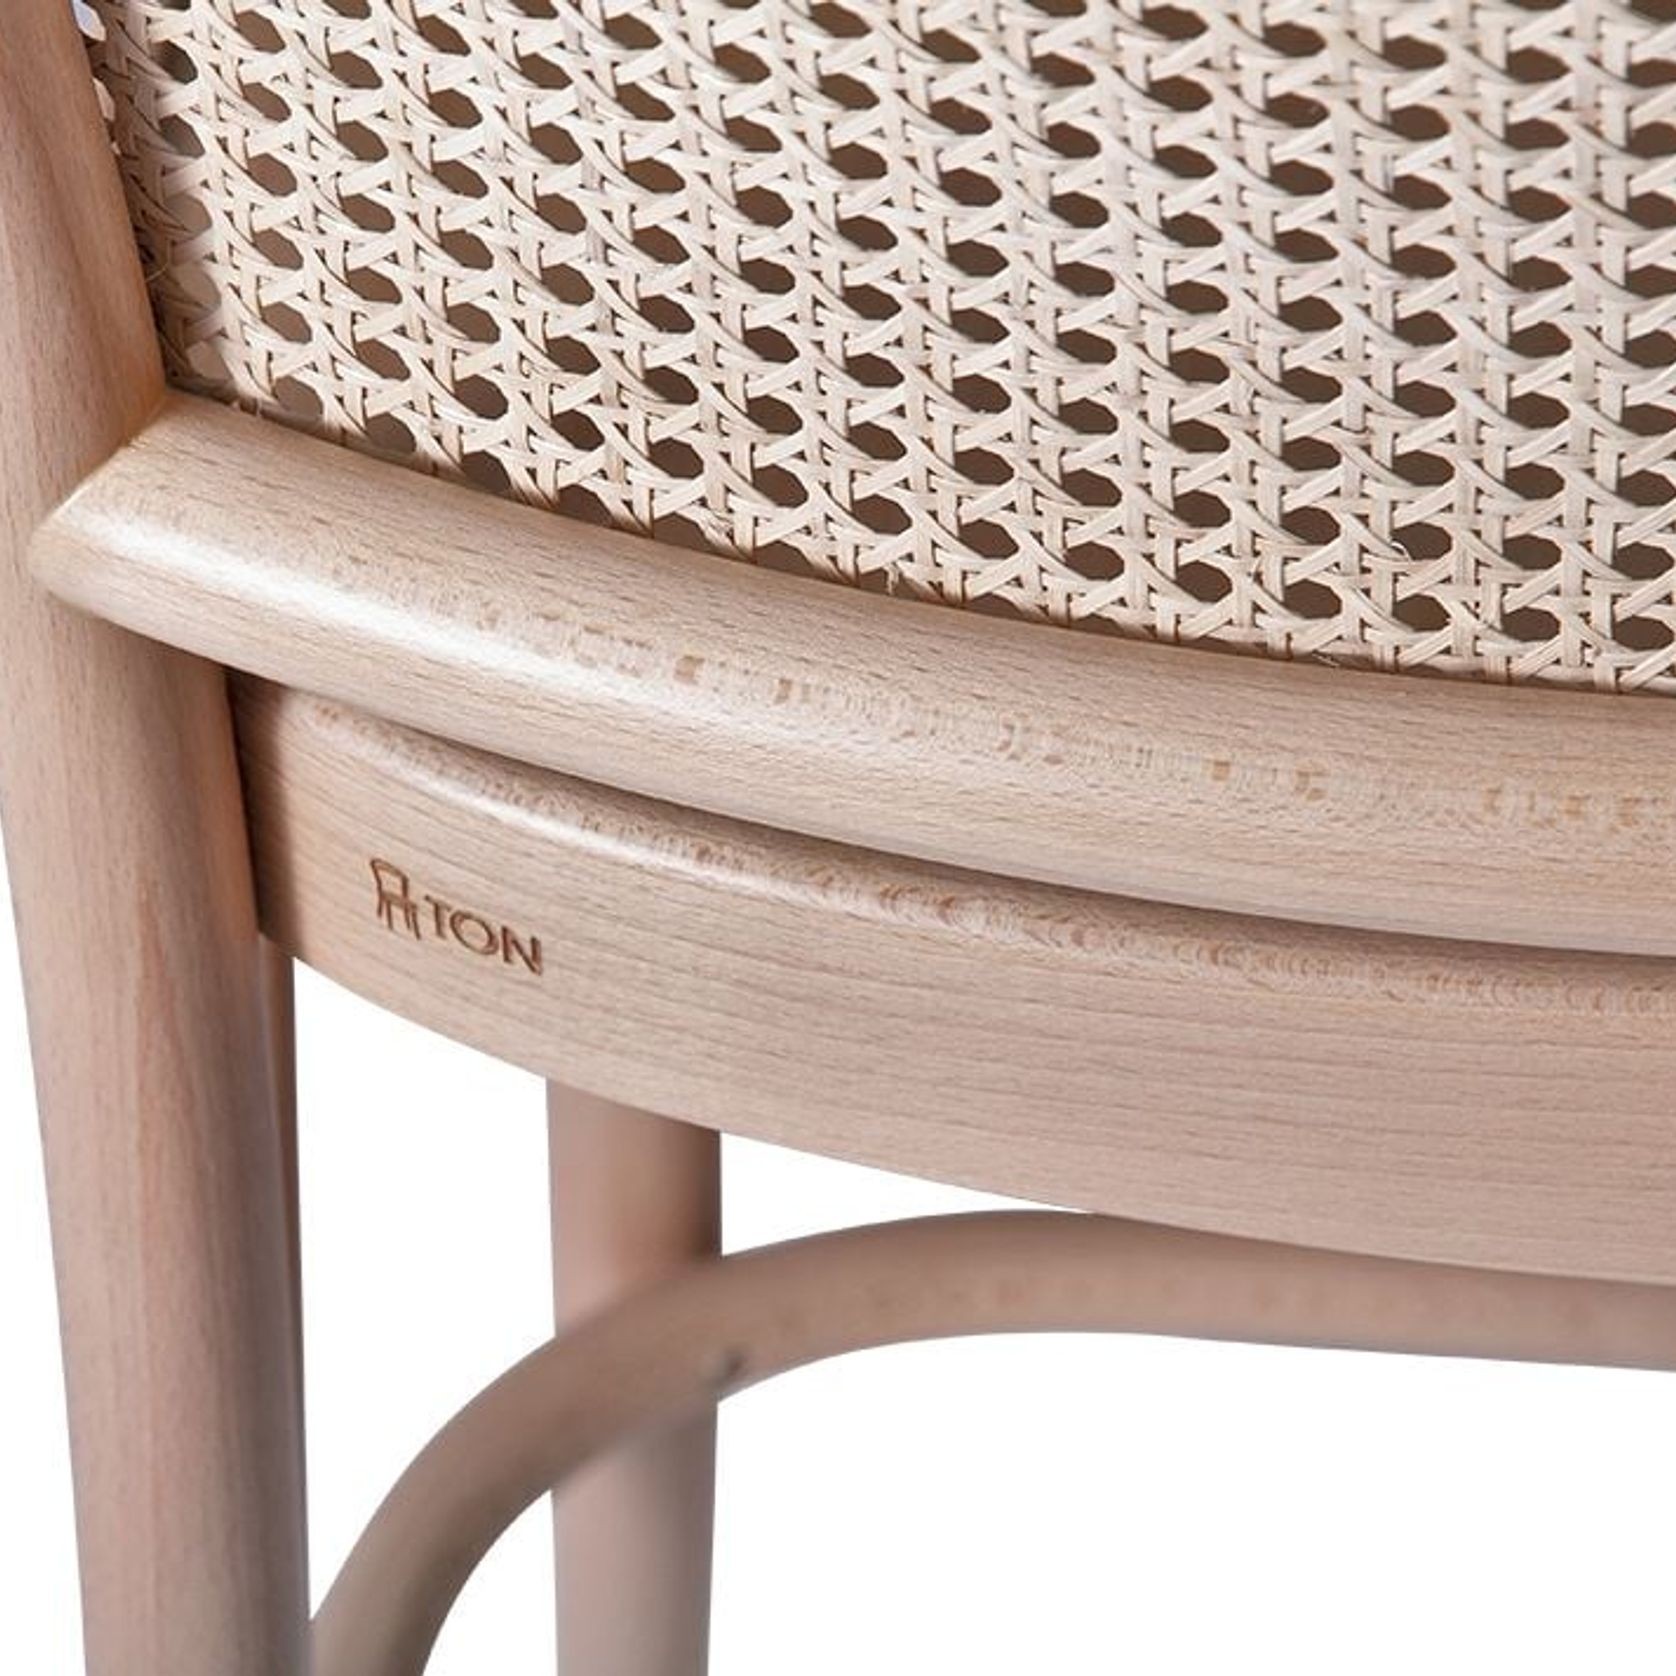 811 Hoffmann Stool - Natural Wood Seat - by TON gallery detail image